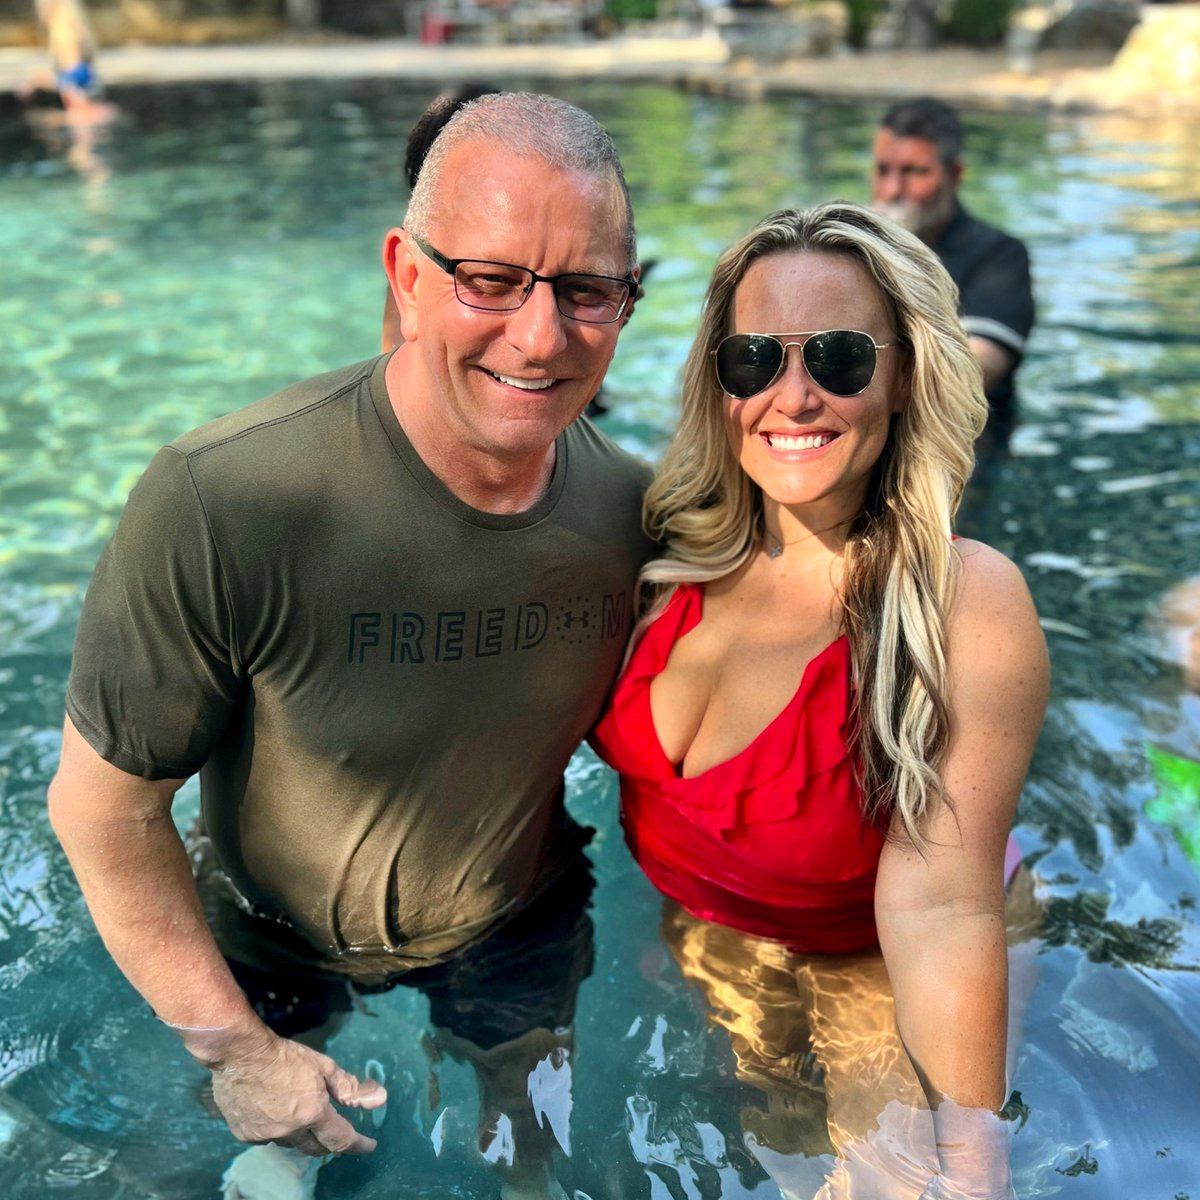 Chef Robert Irvine is such a great guy. I love what his foundation does to honor Veterans. For more into checkout the Robert Irvine Foundation ❤️🇺🇸